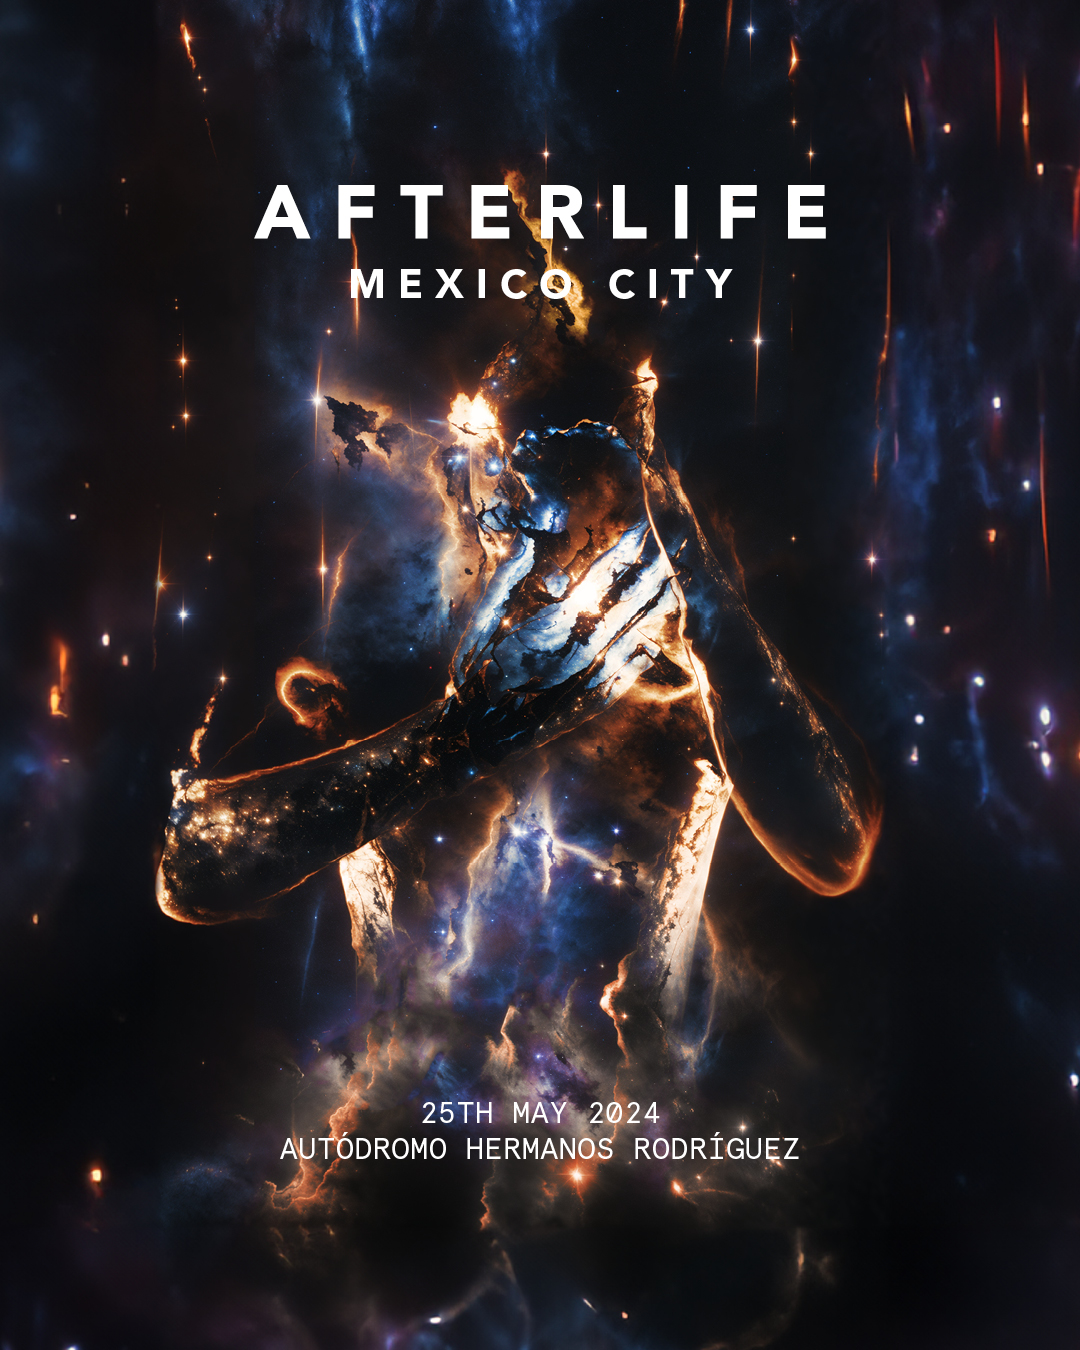 Afterlife in Los Angeles, 2023-2024 Concert Tickets